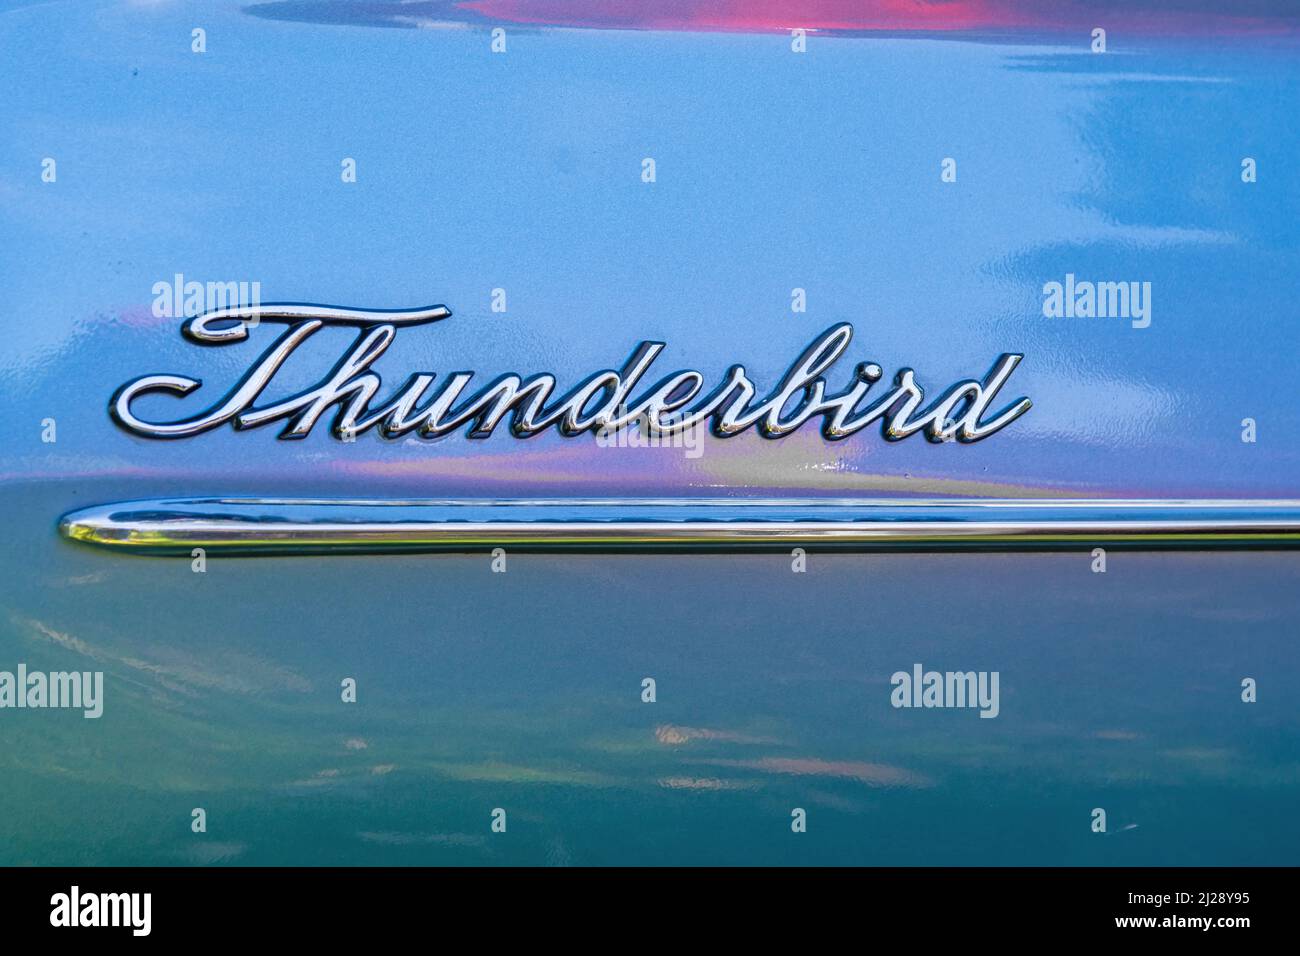 Thunderbird badge on a 1966 Ford Coupe Stock Photo